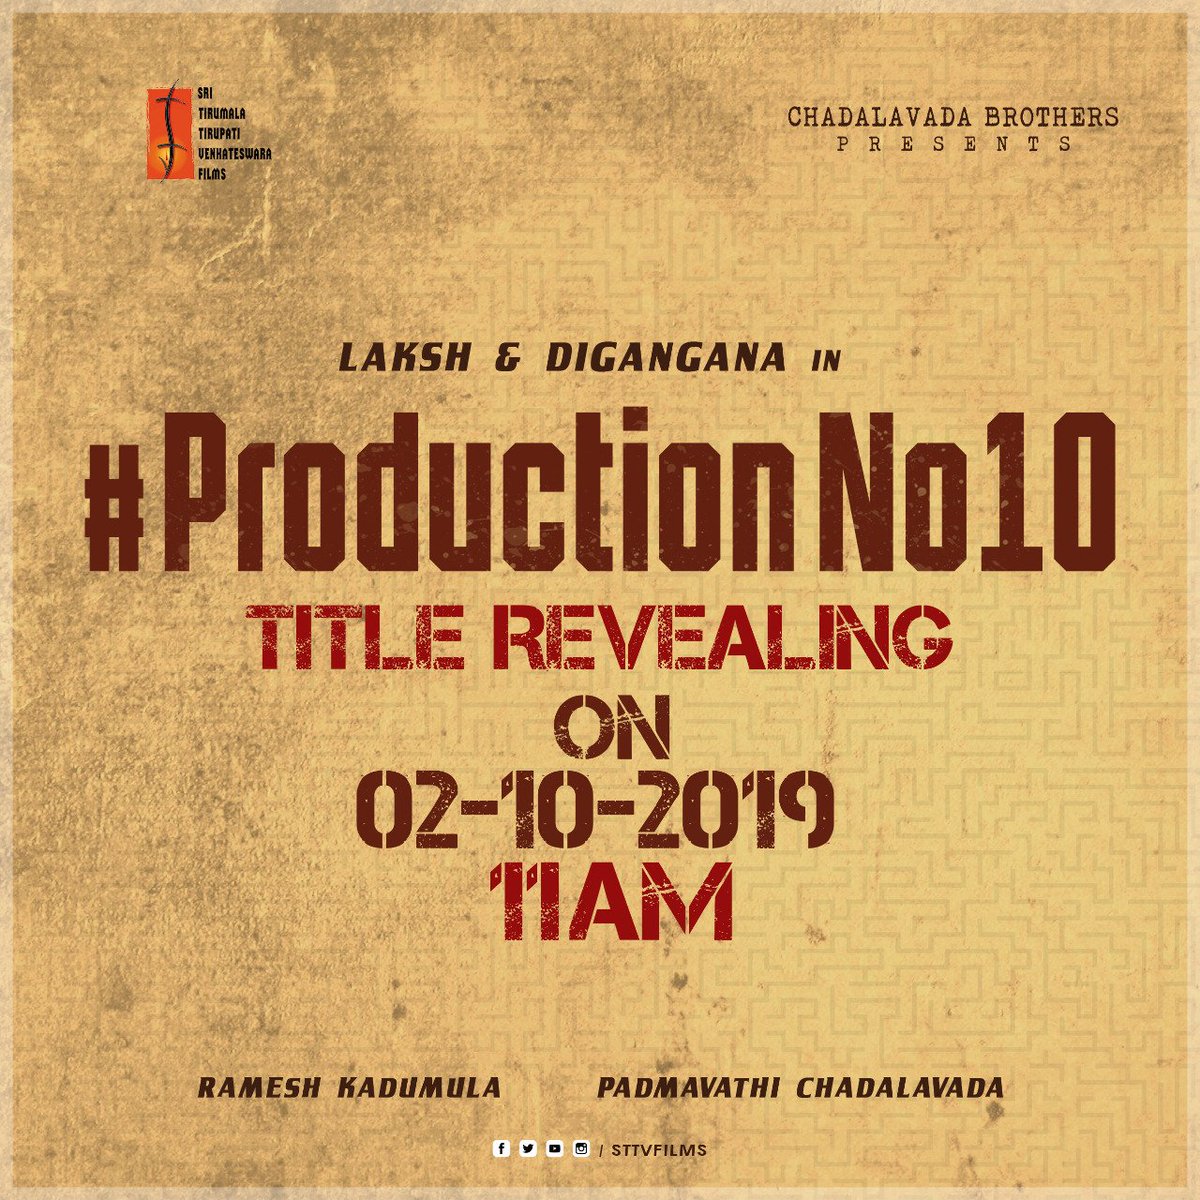 Title revealing on 2nd October at 11 AM. 

#Production10
@actorlaksh @DiganganaS 
A #RameshKadumula Thriller
Music by #SekharChandra
@sttvfilms